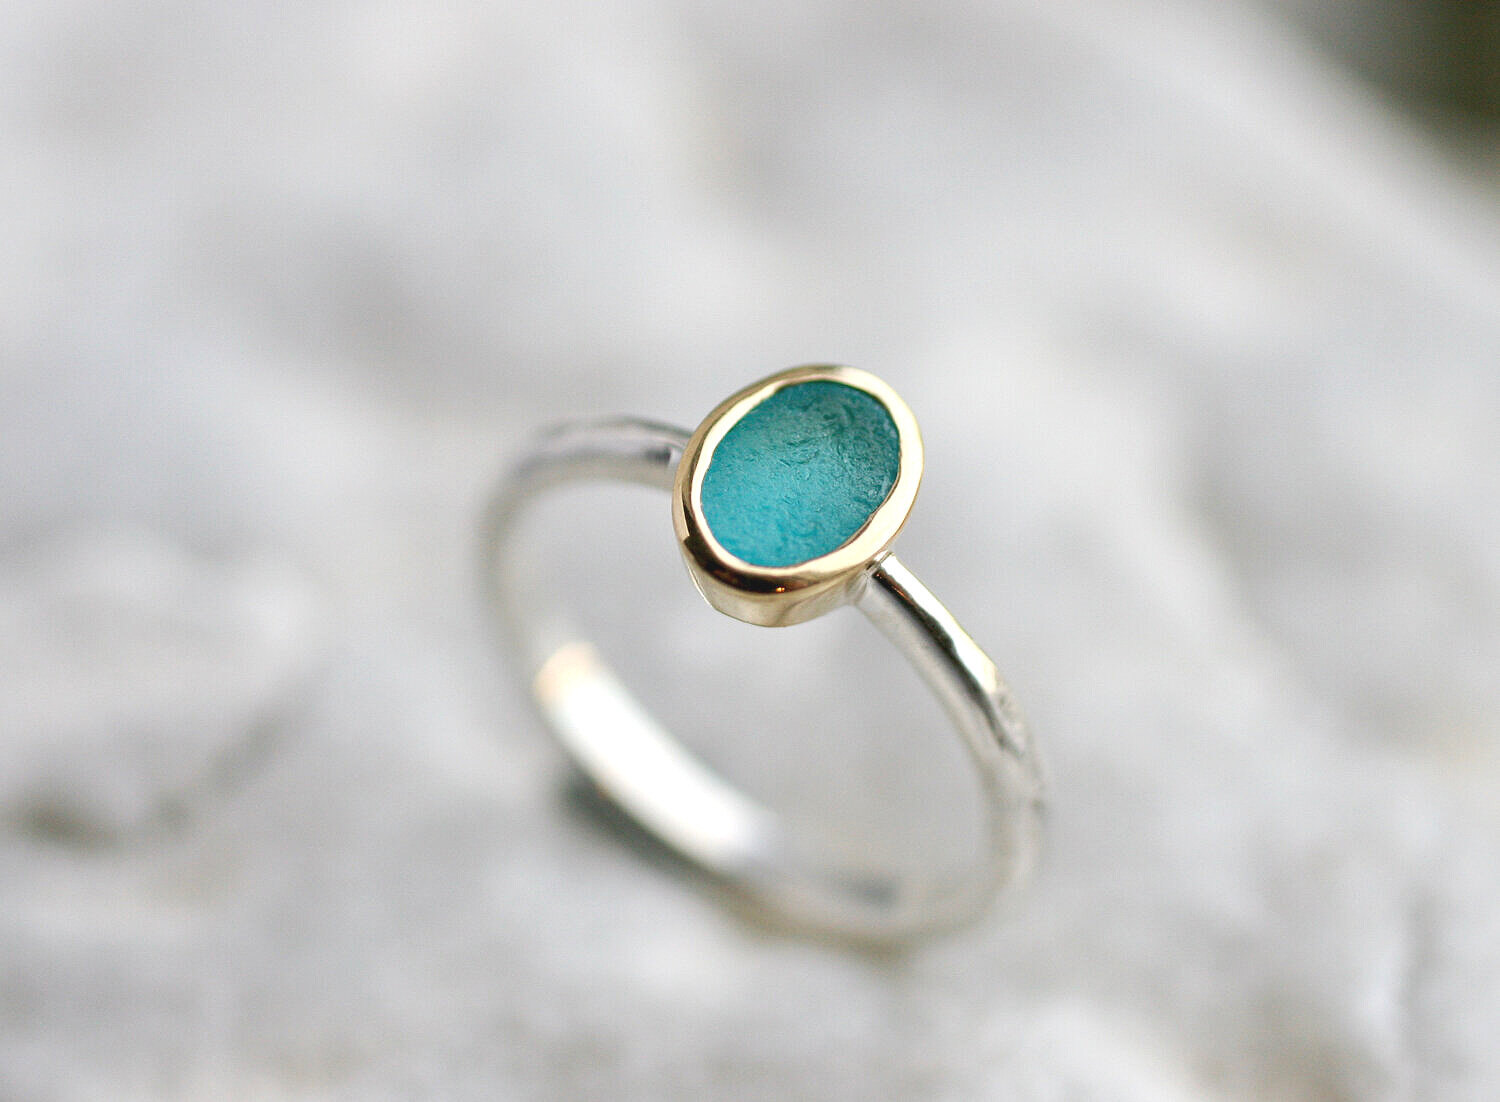 How To Make A Sea Glass Ring With Bezel Setting